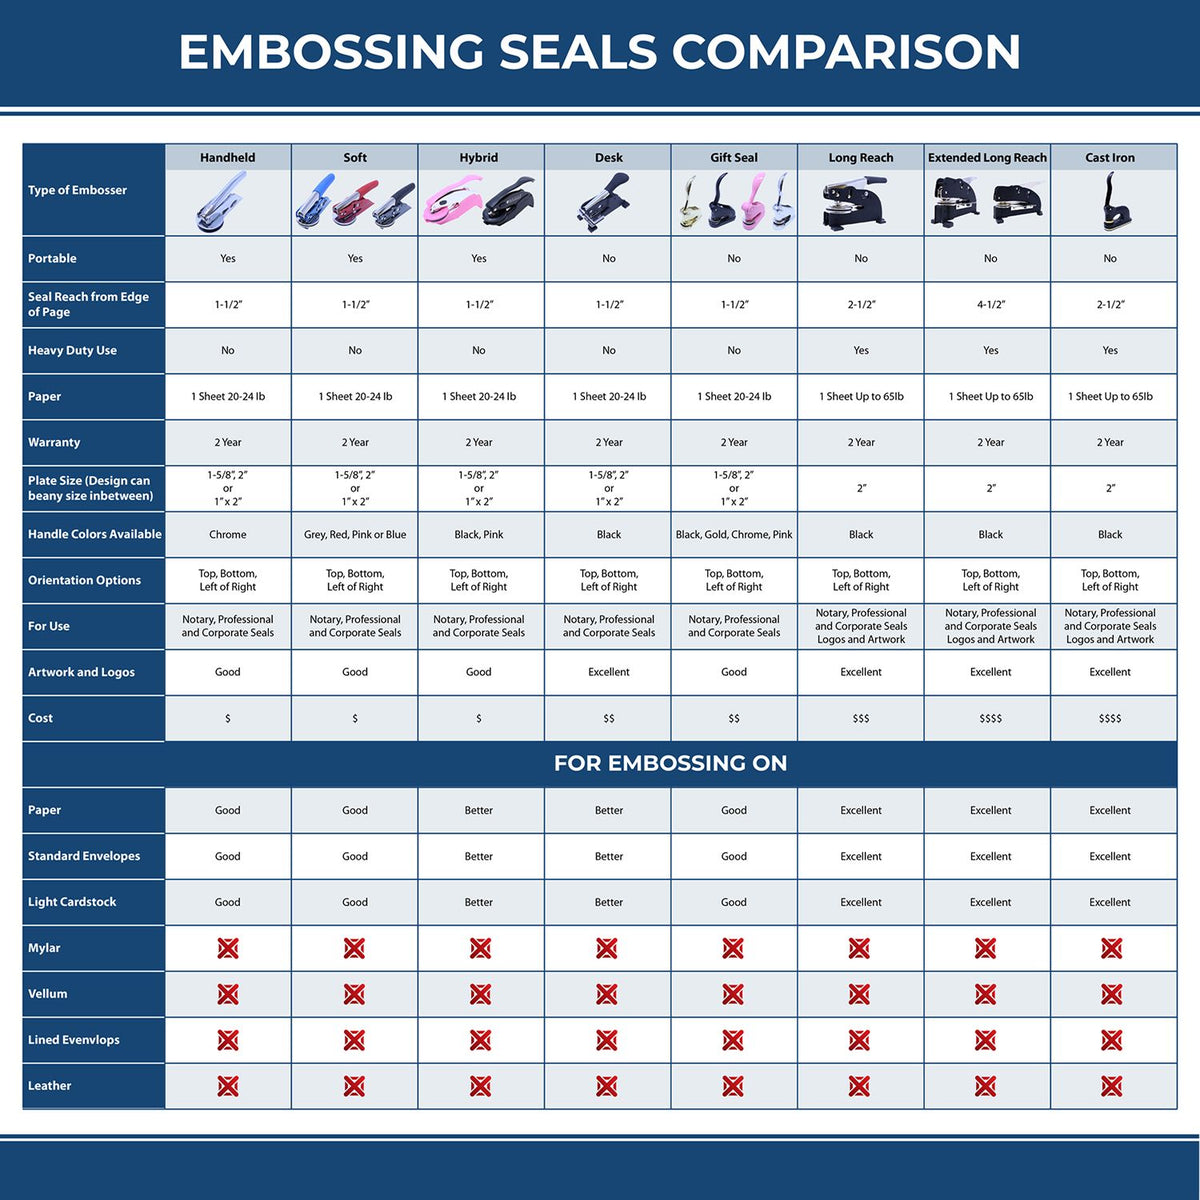 A comparison chart for the different types of mount models available for the Heavy Duty Cast Iron Michigan Architect Embosser.